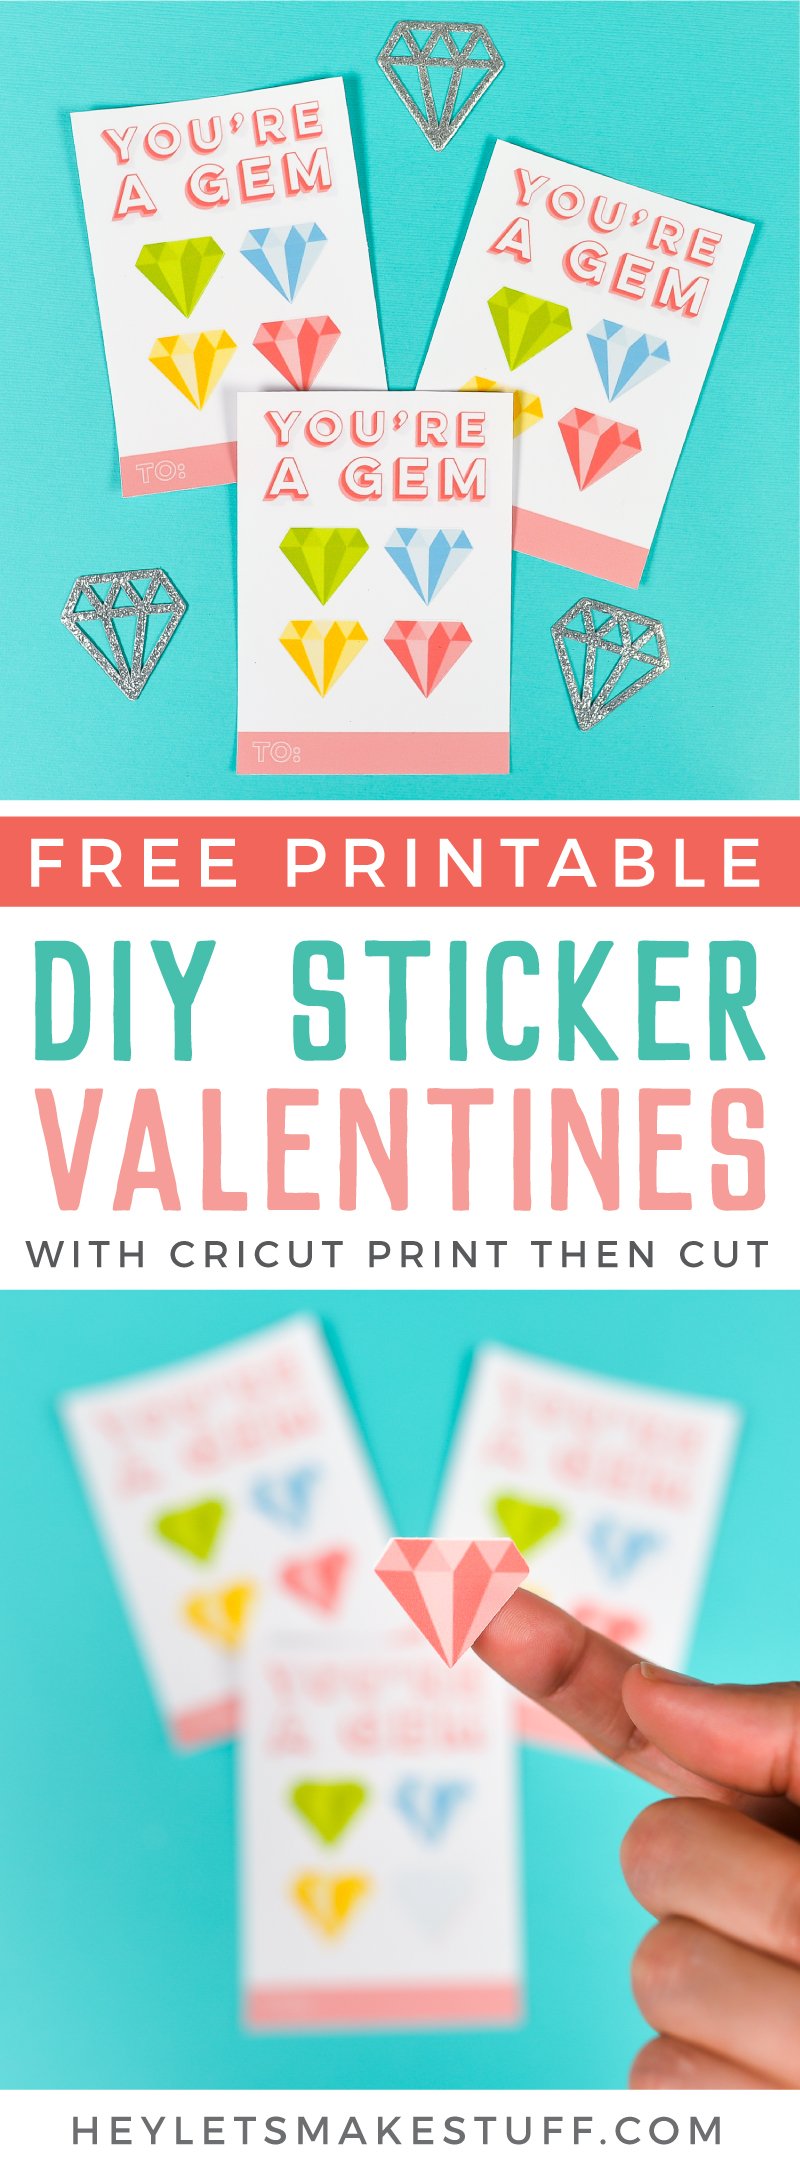 Images of Valentine stickers that say, \"You\'re A Gem\" and of a hand holding a sticker of a gem on the index finger with advertising from HEYLETSMAKESTUFF.COM for a free printable DIY sticker Valentines with Cricut print then cut feature